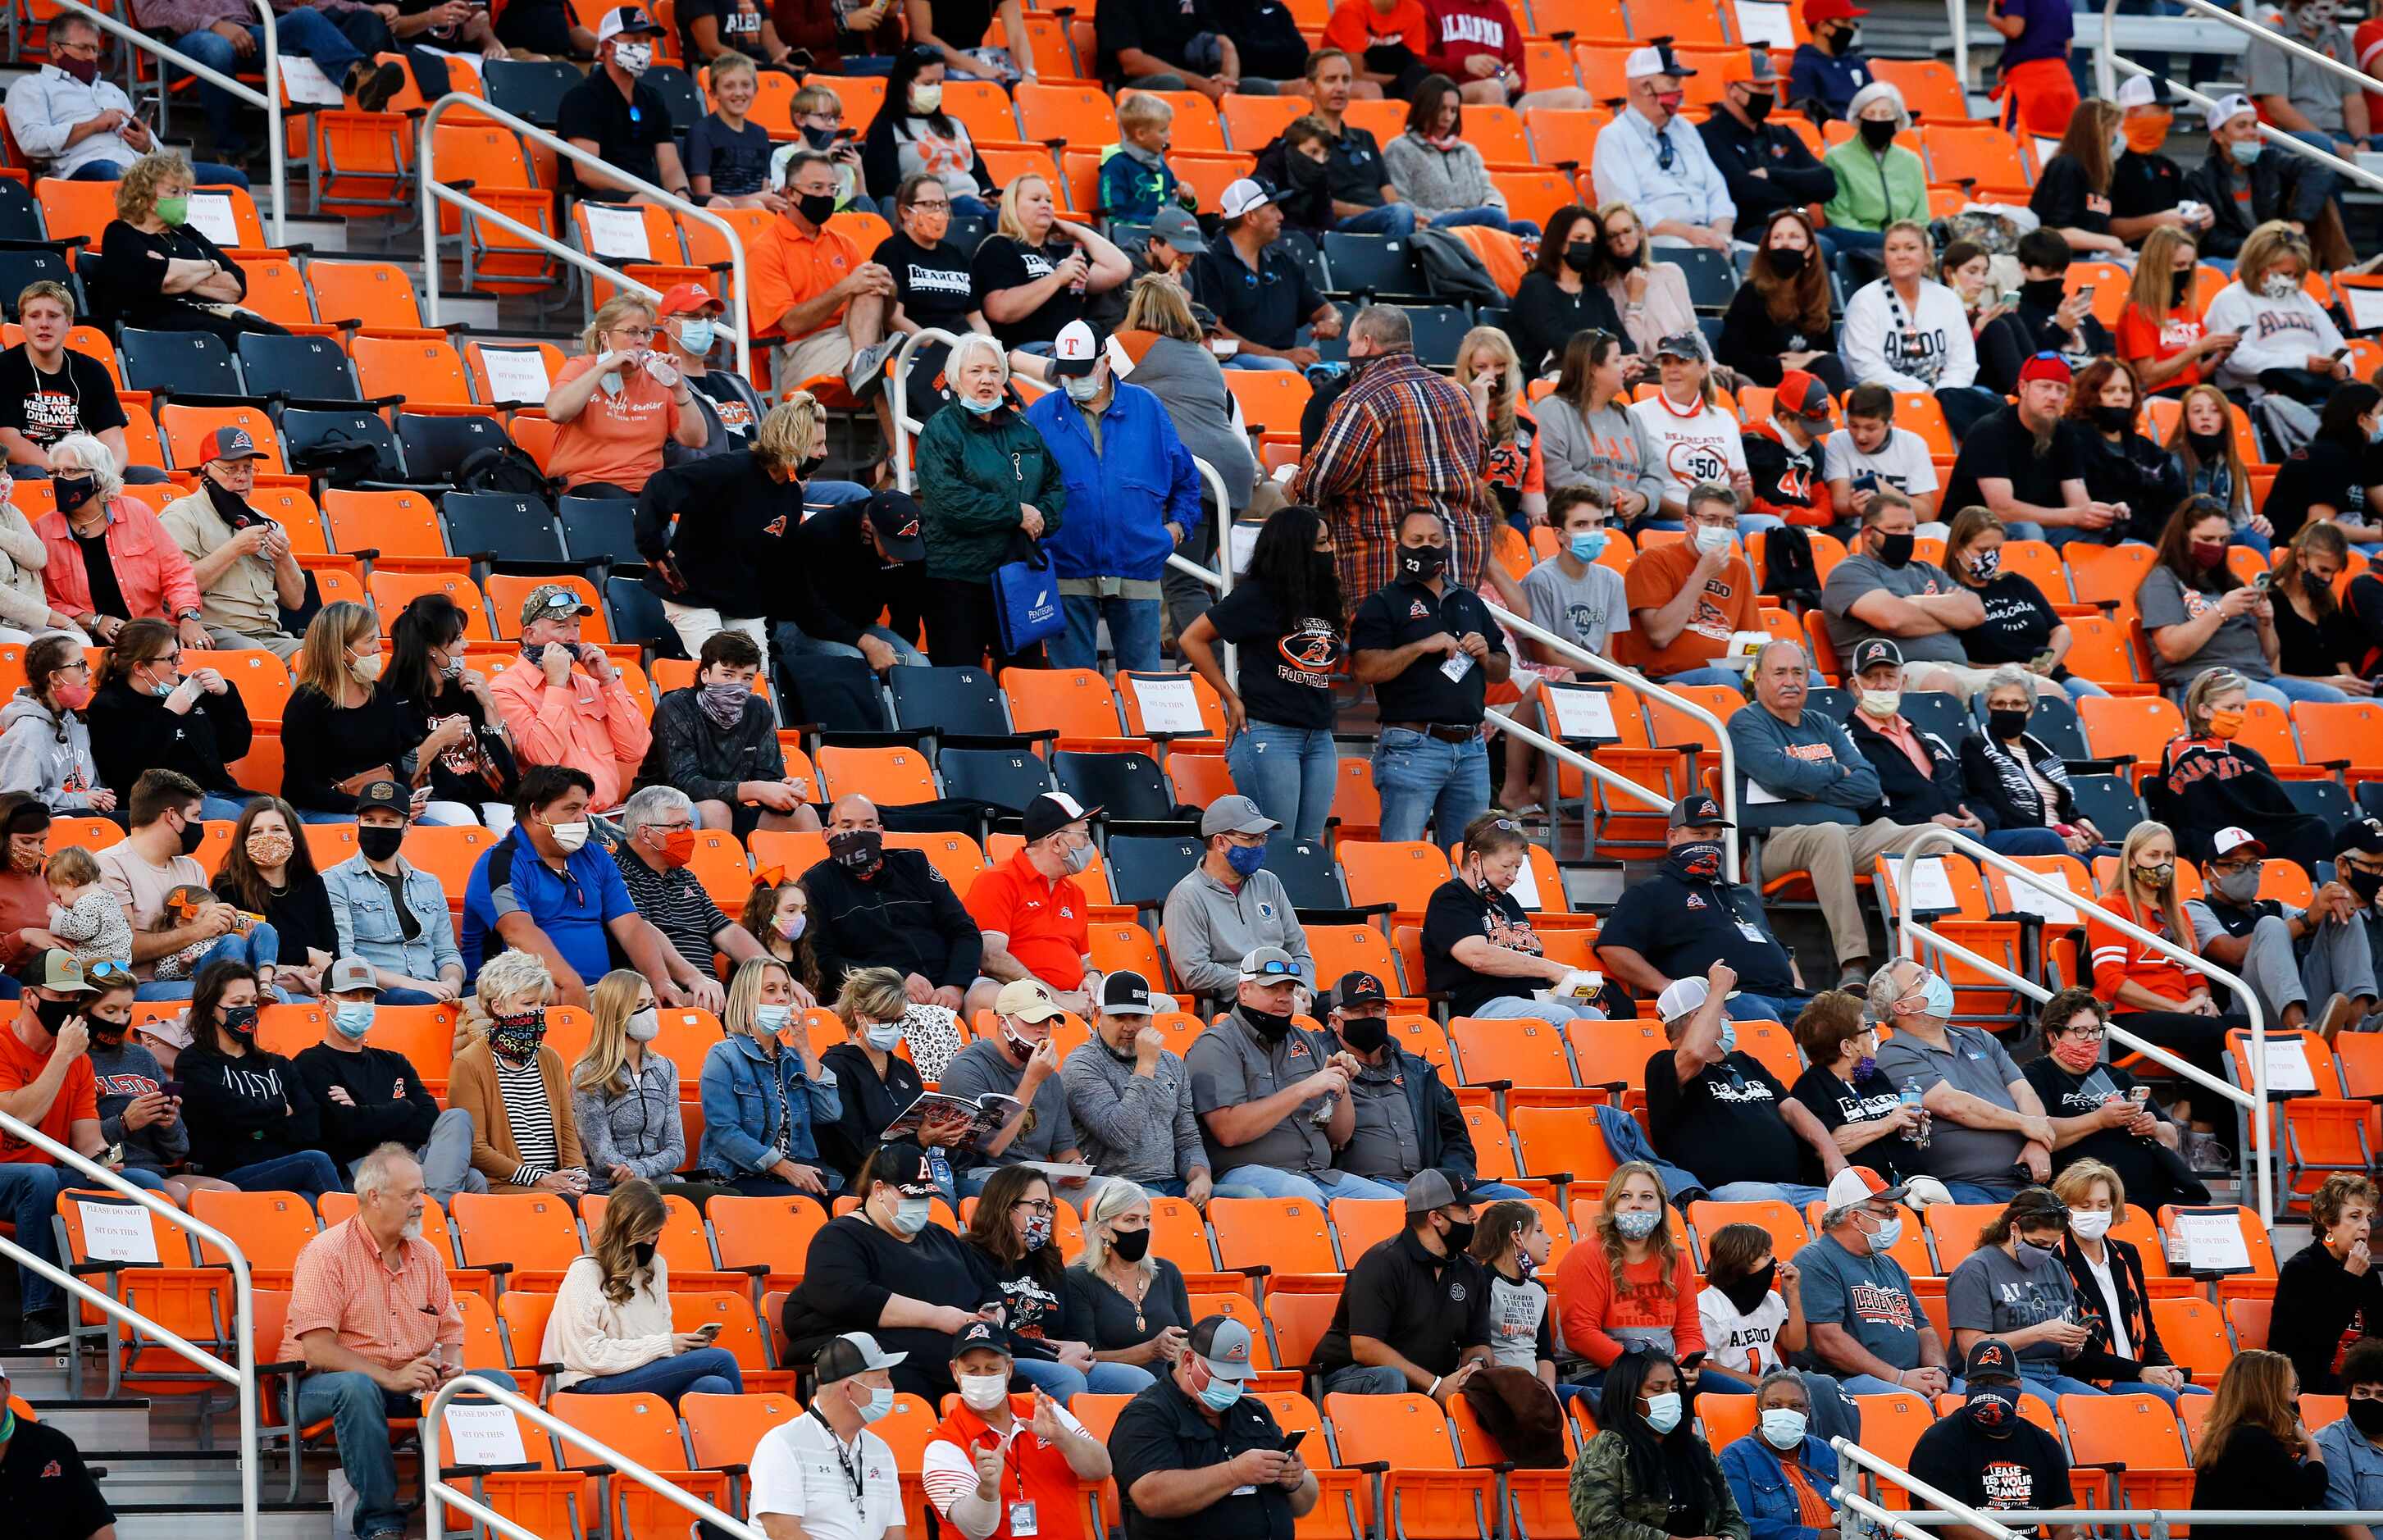 Aledo fans masked up and socially distanced in the stands before their team faced Frisco...